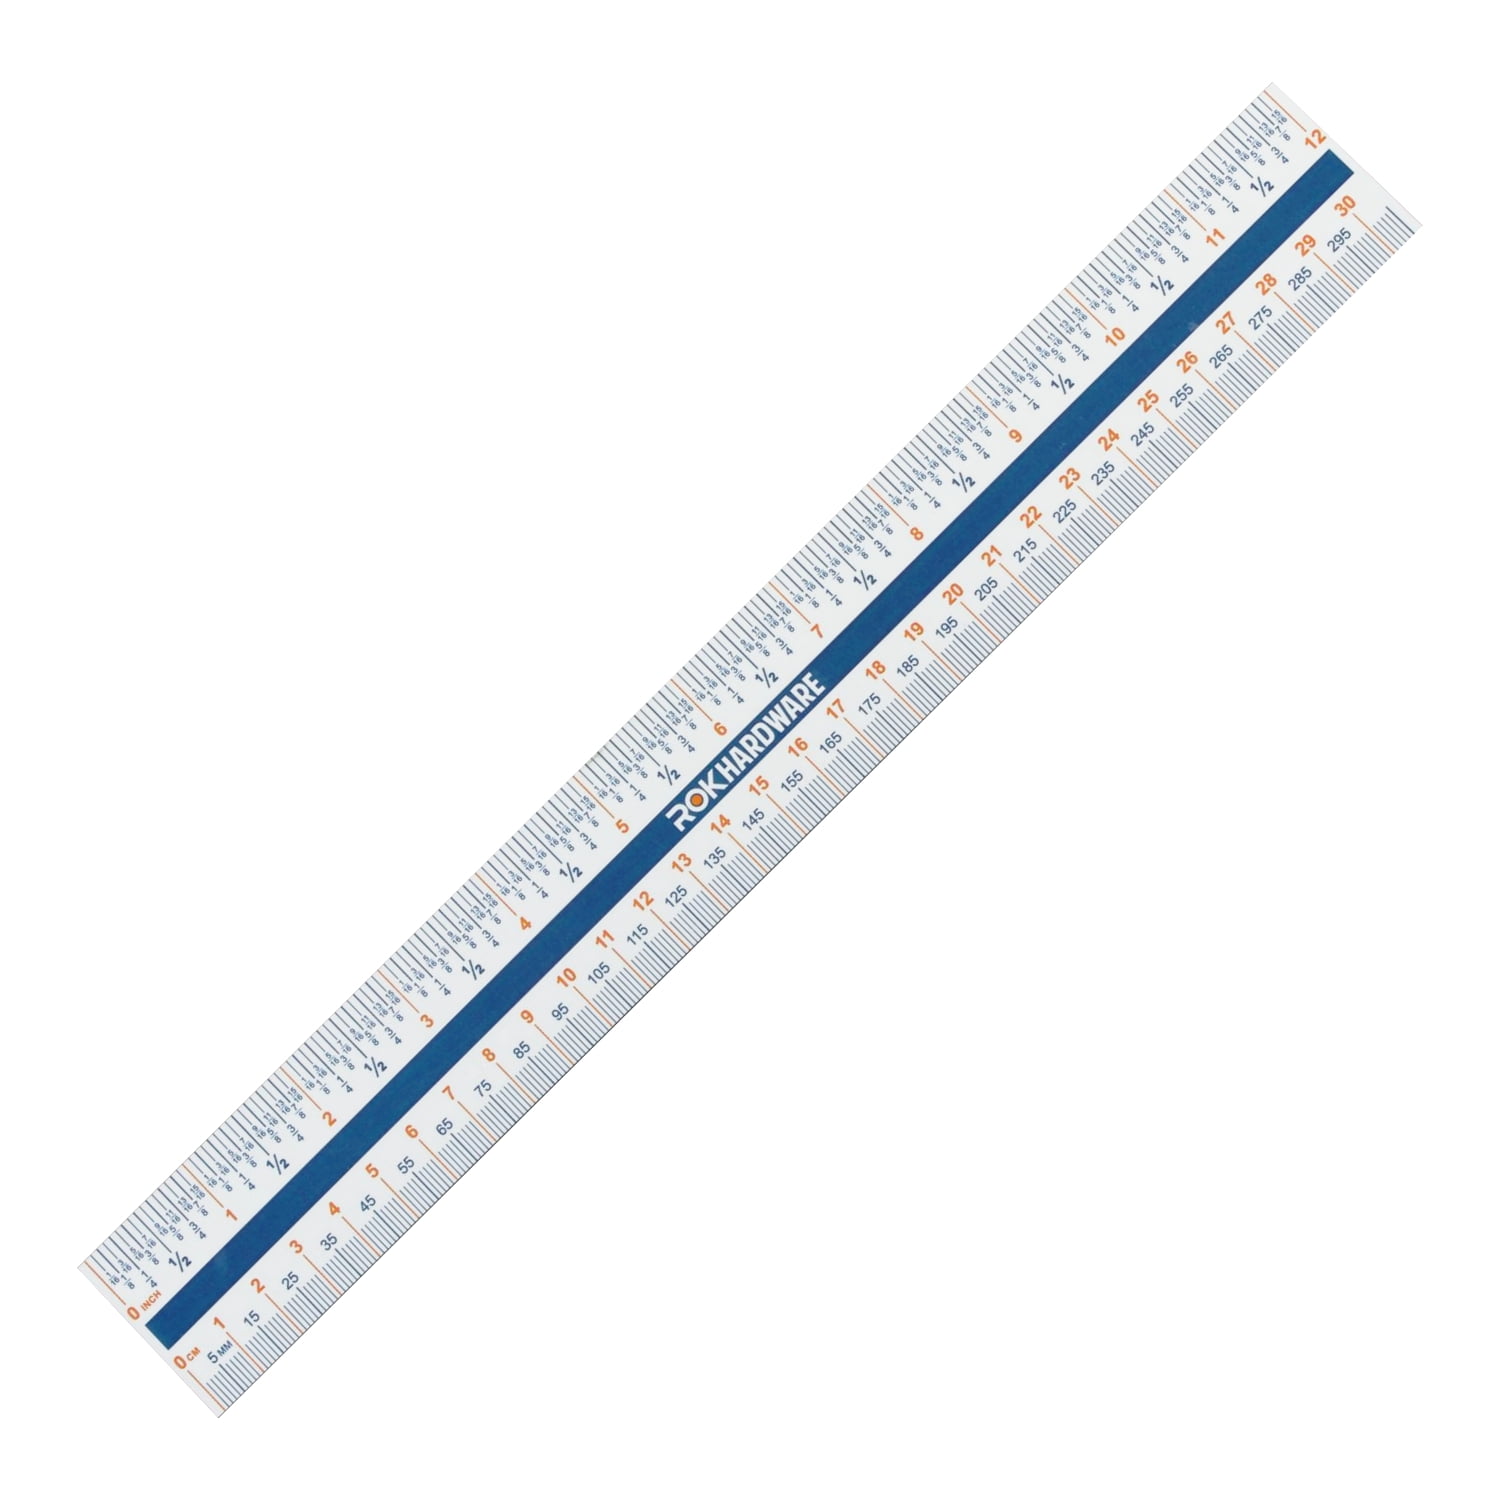 12 Inch Standard and Metric Plastic Ruler I Love Heart Places S 